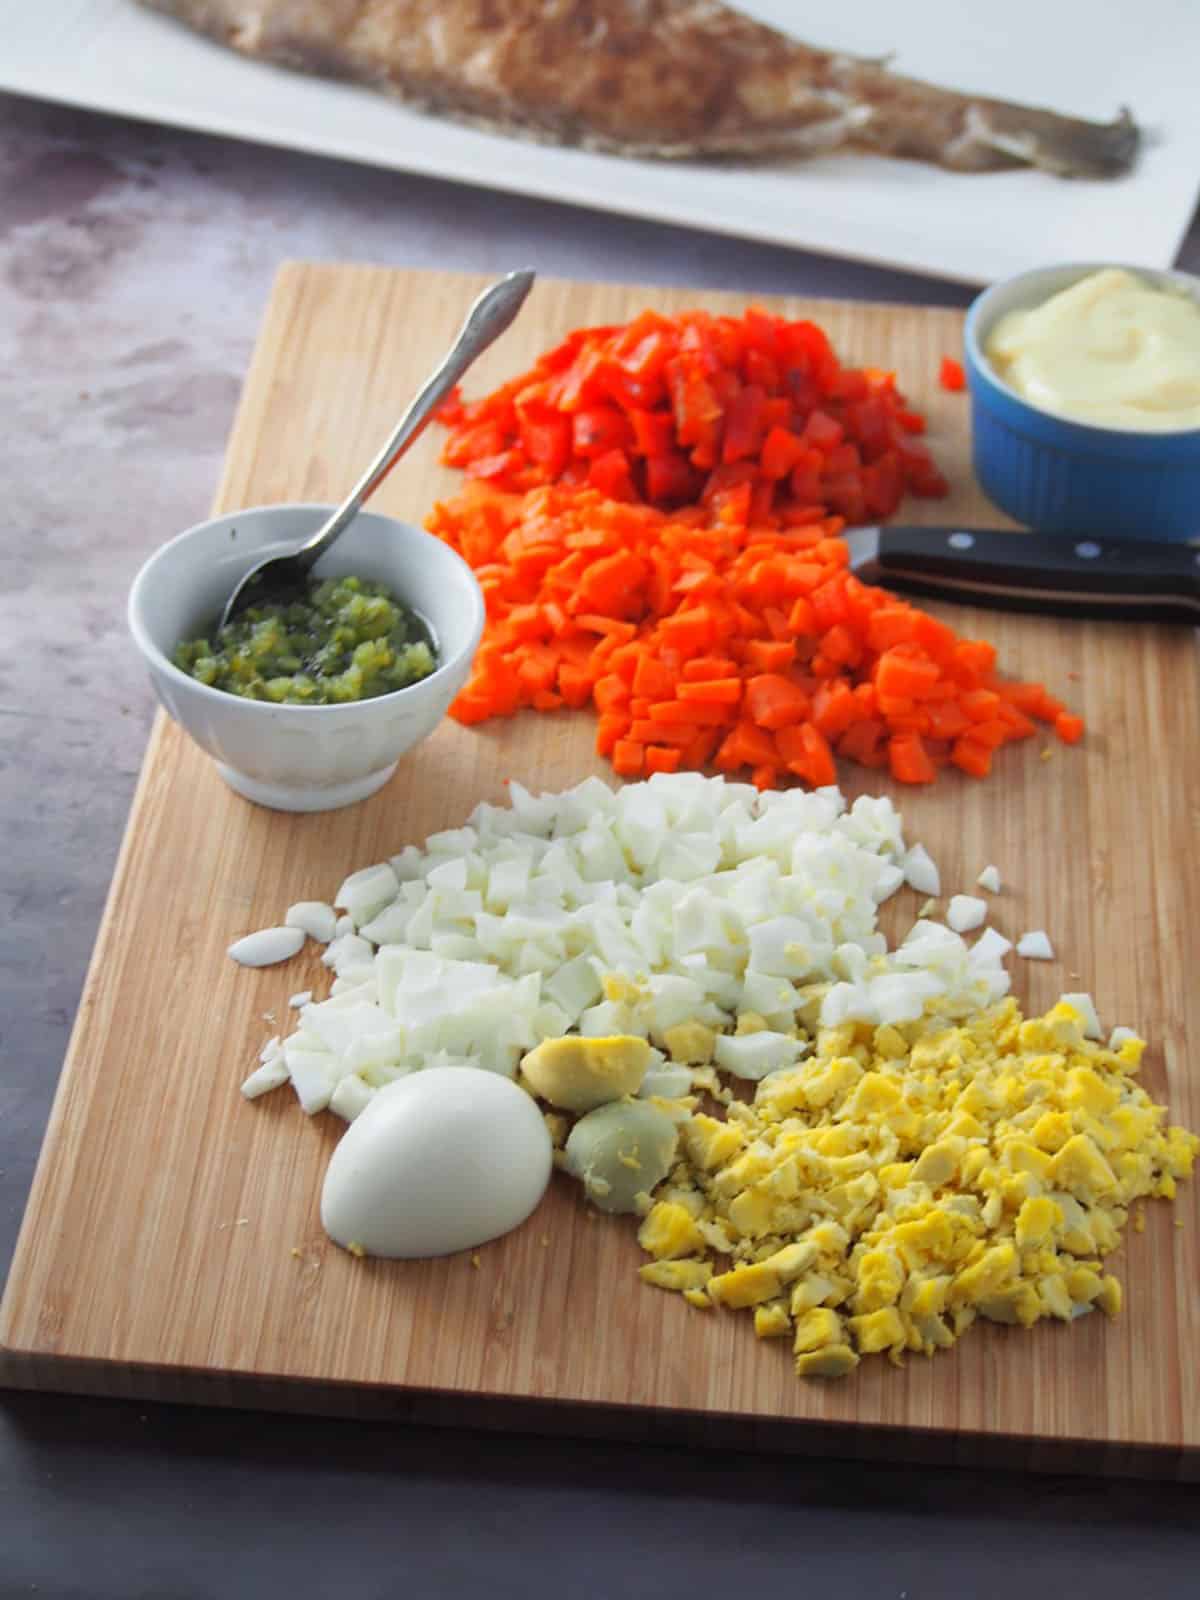 chopped boiled eggs, roasted bell peppers, sweet relish, mayonnaise, diced carrots